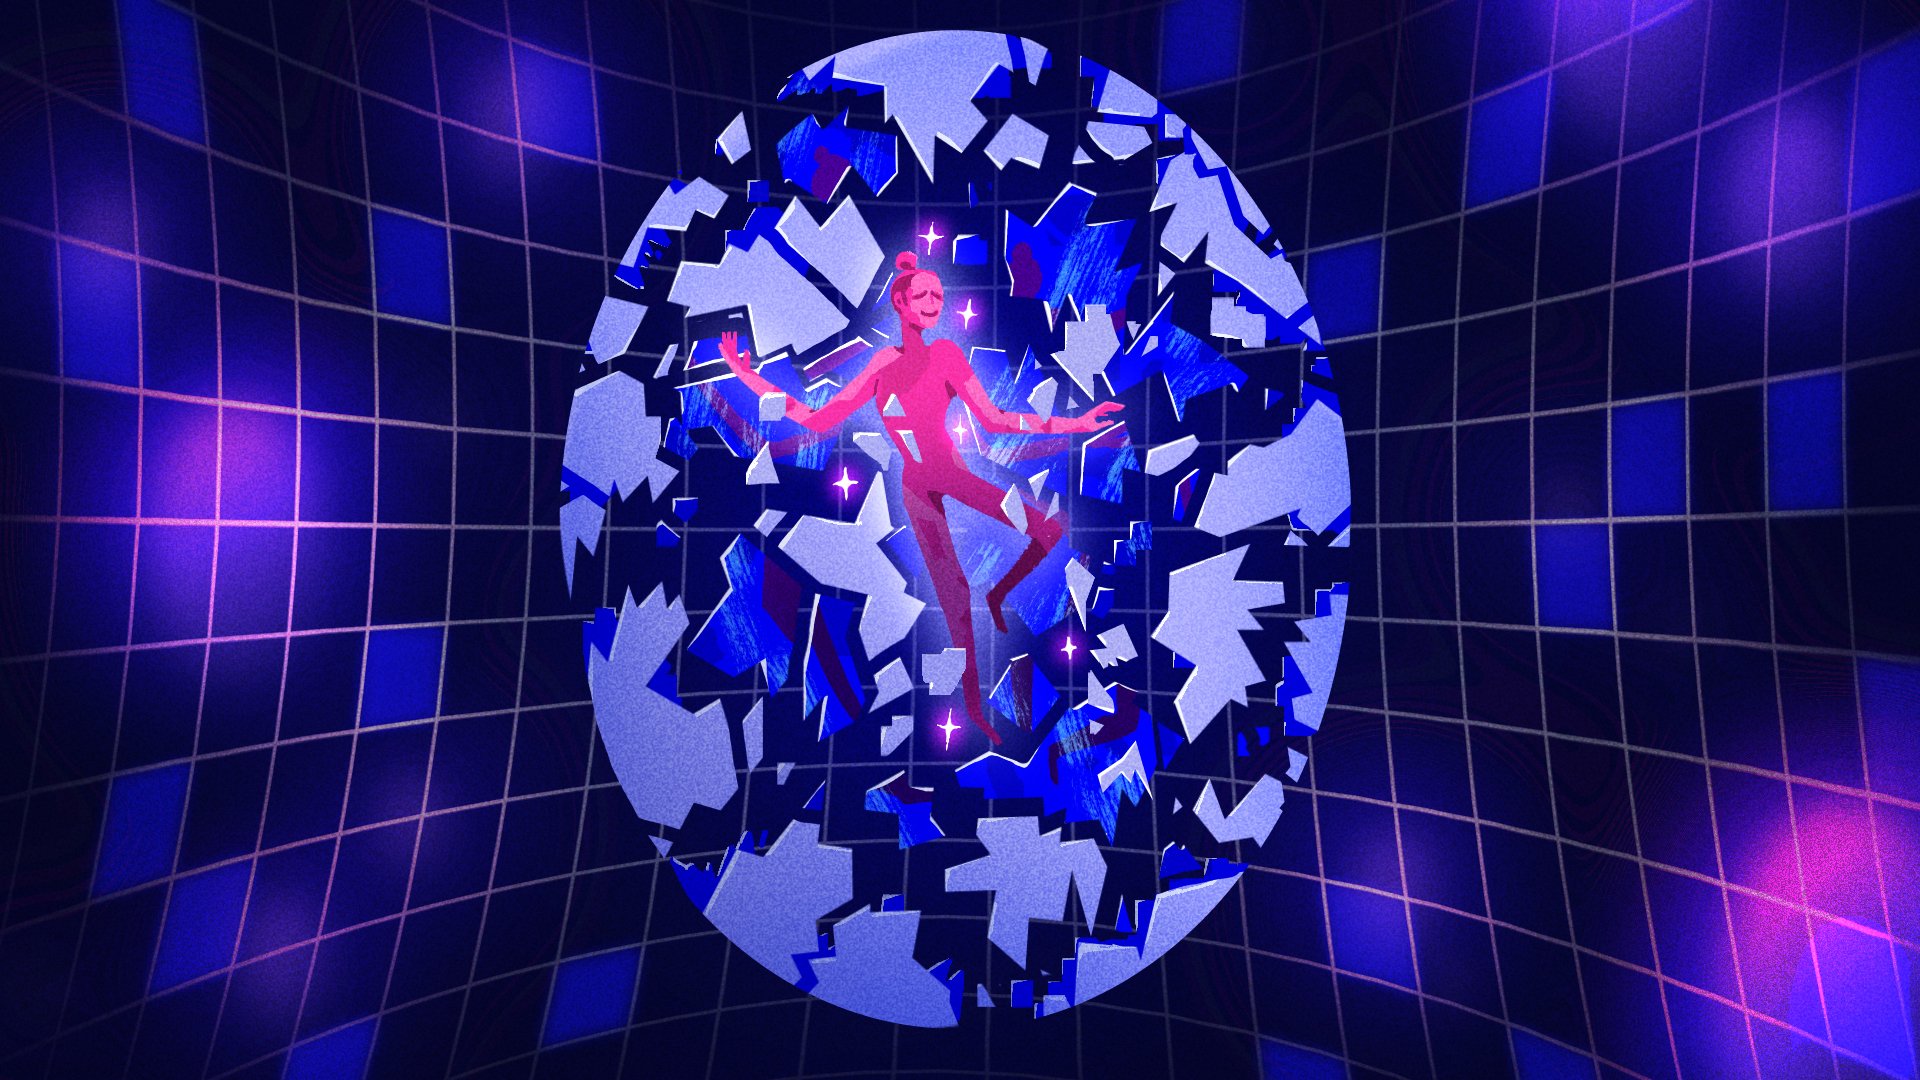 pink person inside a cracking egg surrounded by screens